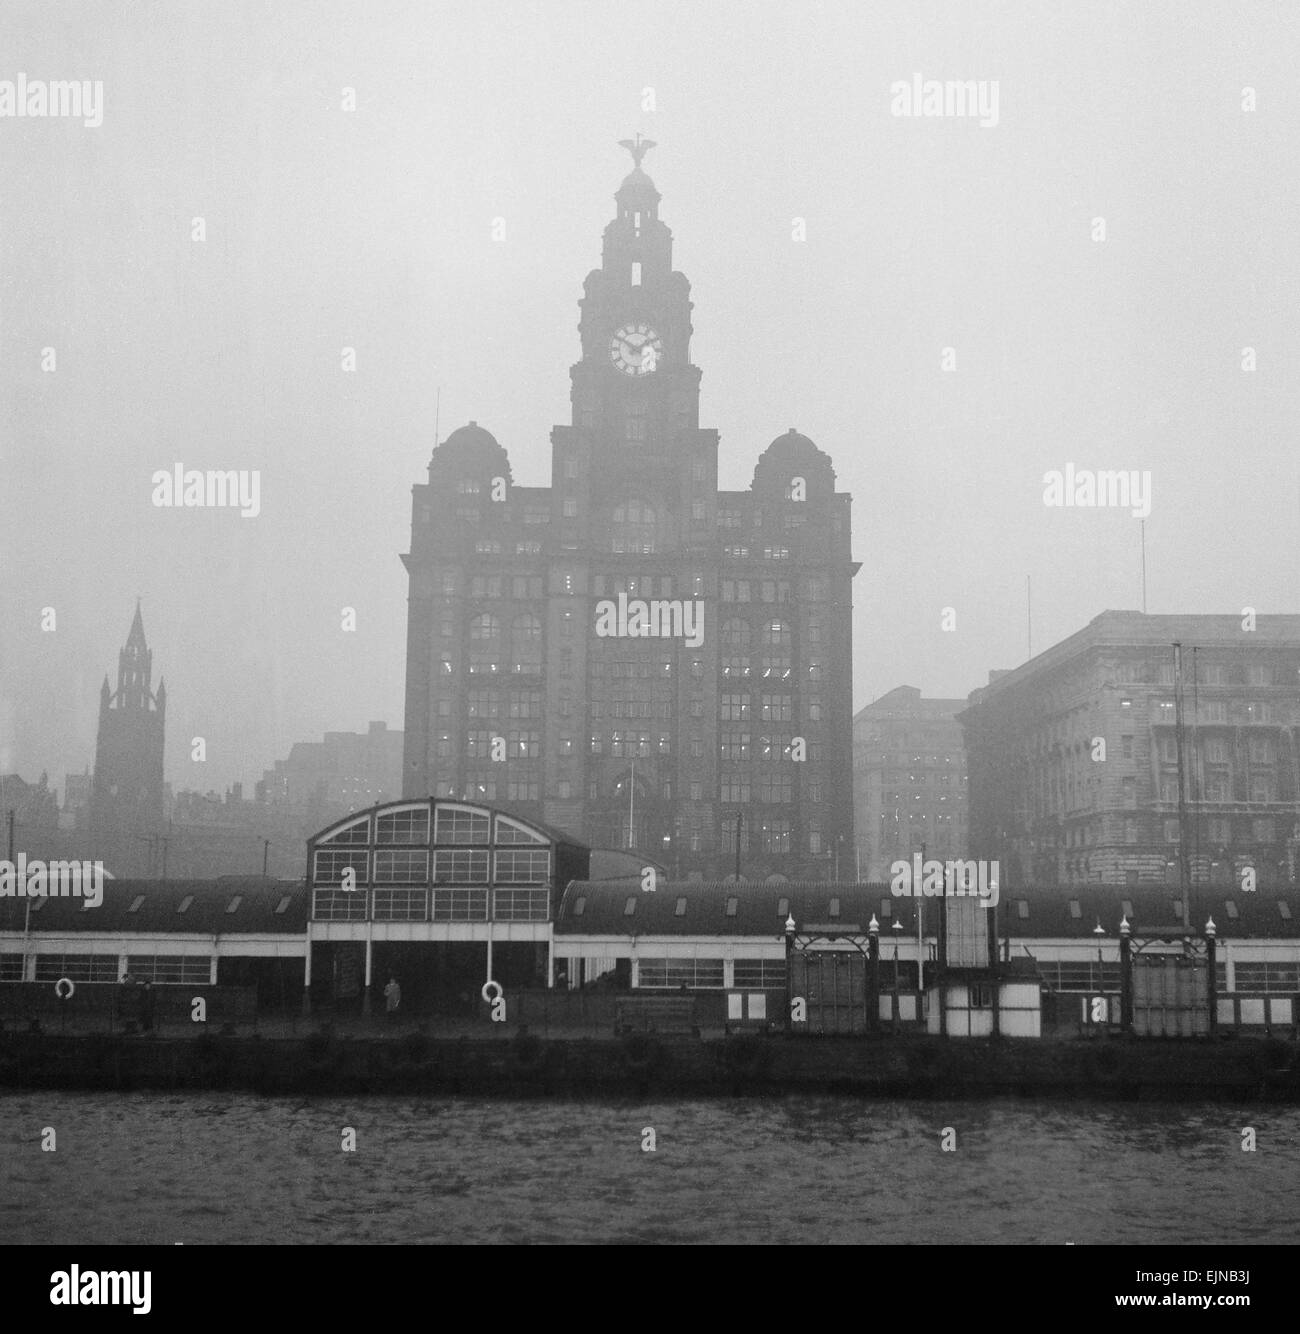 Unemployed and views of Liverpool, 30th November 1962. Docks and Harbour Board offices, the Royal Liver Building and the Cunard building seen from across the Mersey. Stock Photo